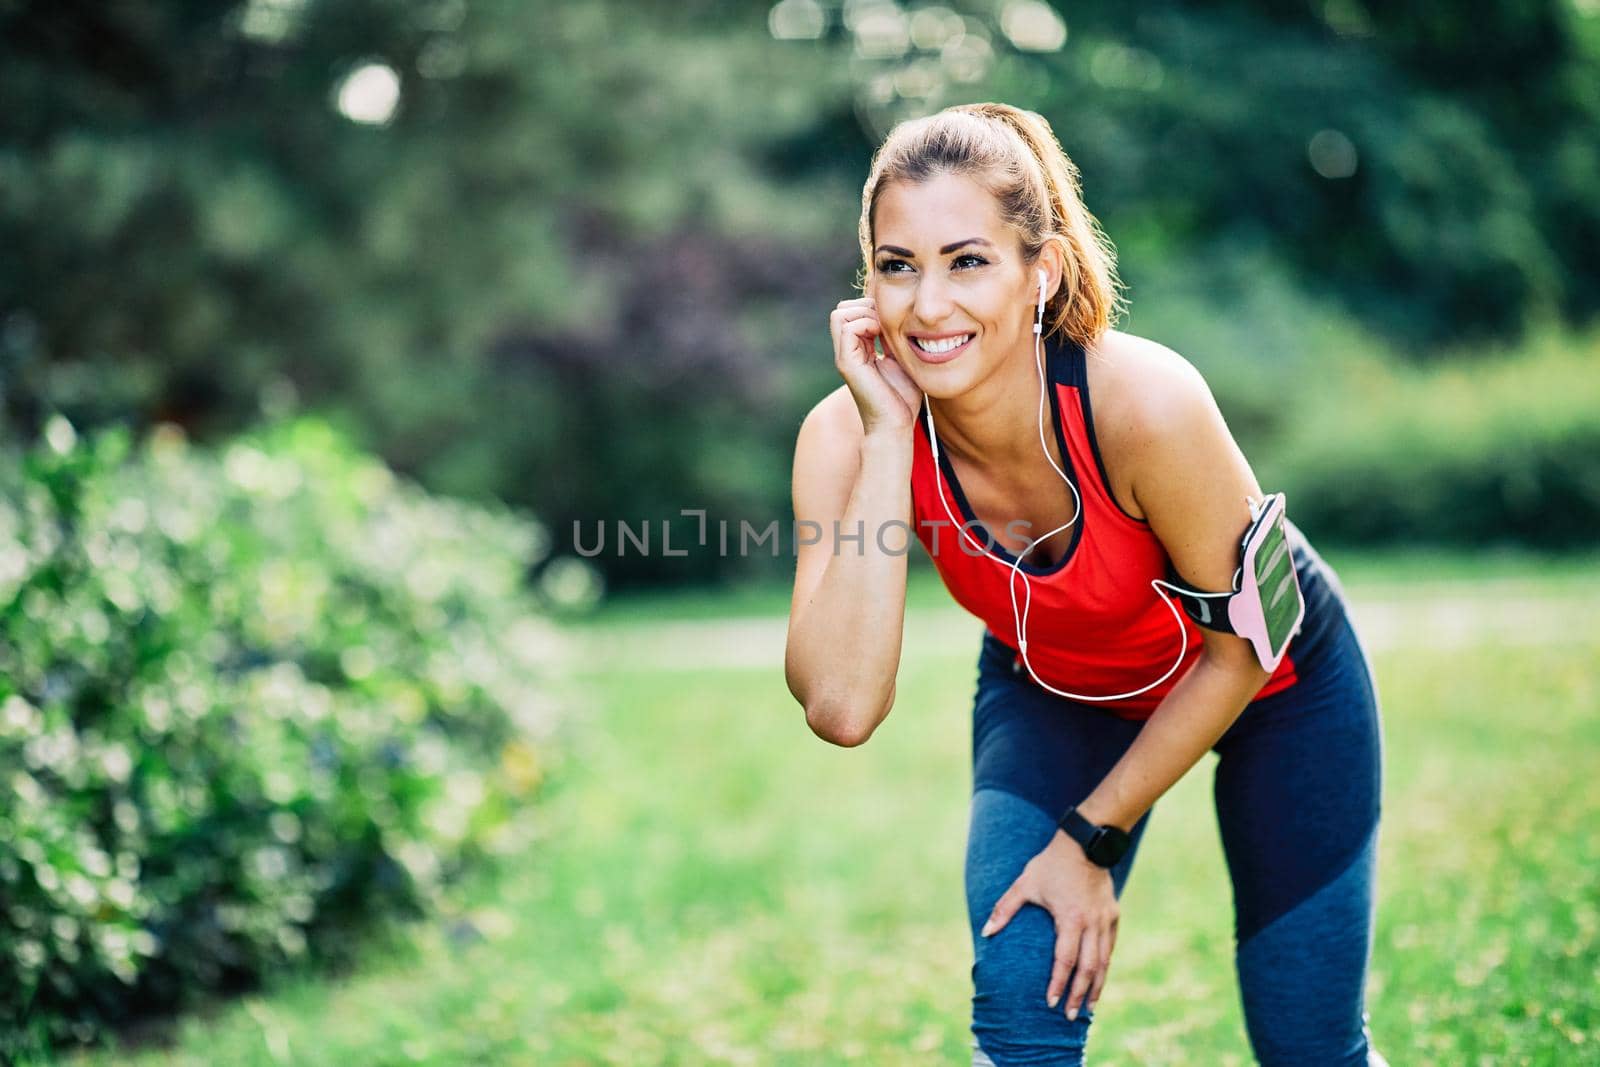 fitness woman park exercise lifestyle outdoor sport healthy female nature active young fit training athlete by Picsfive